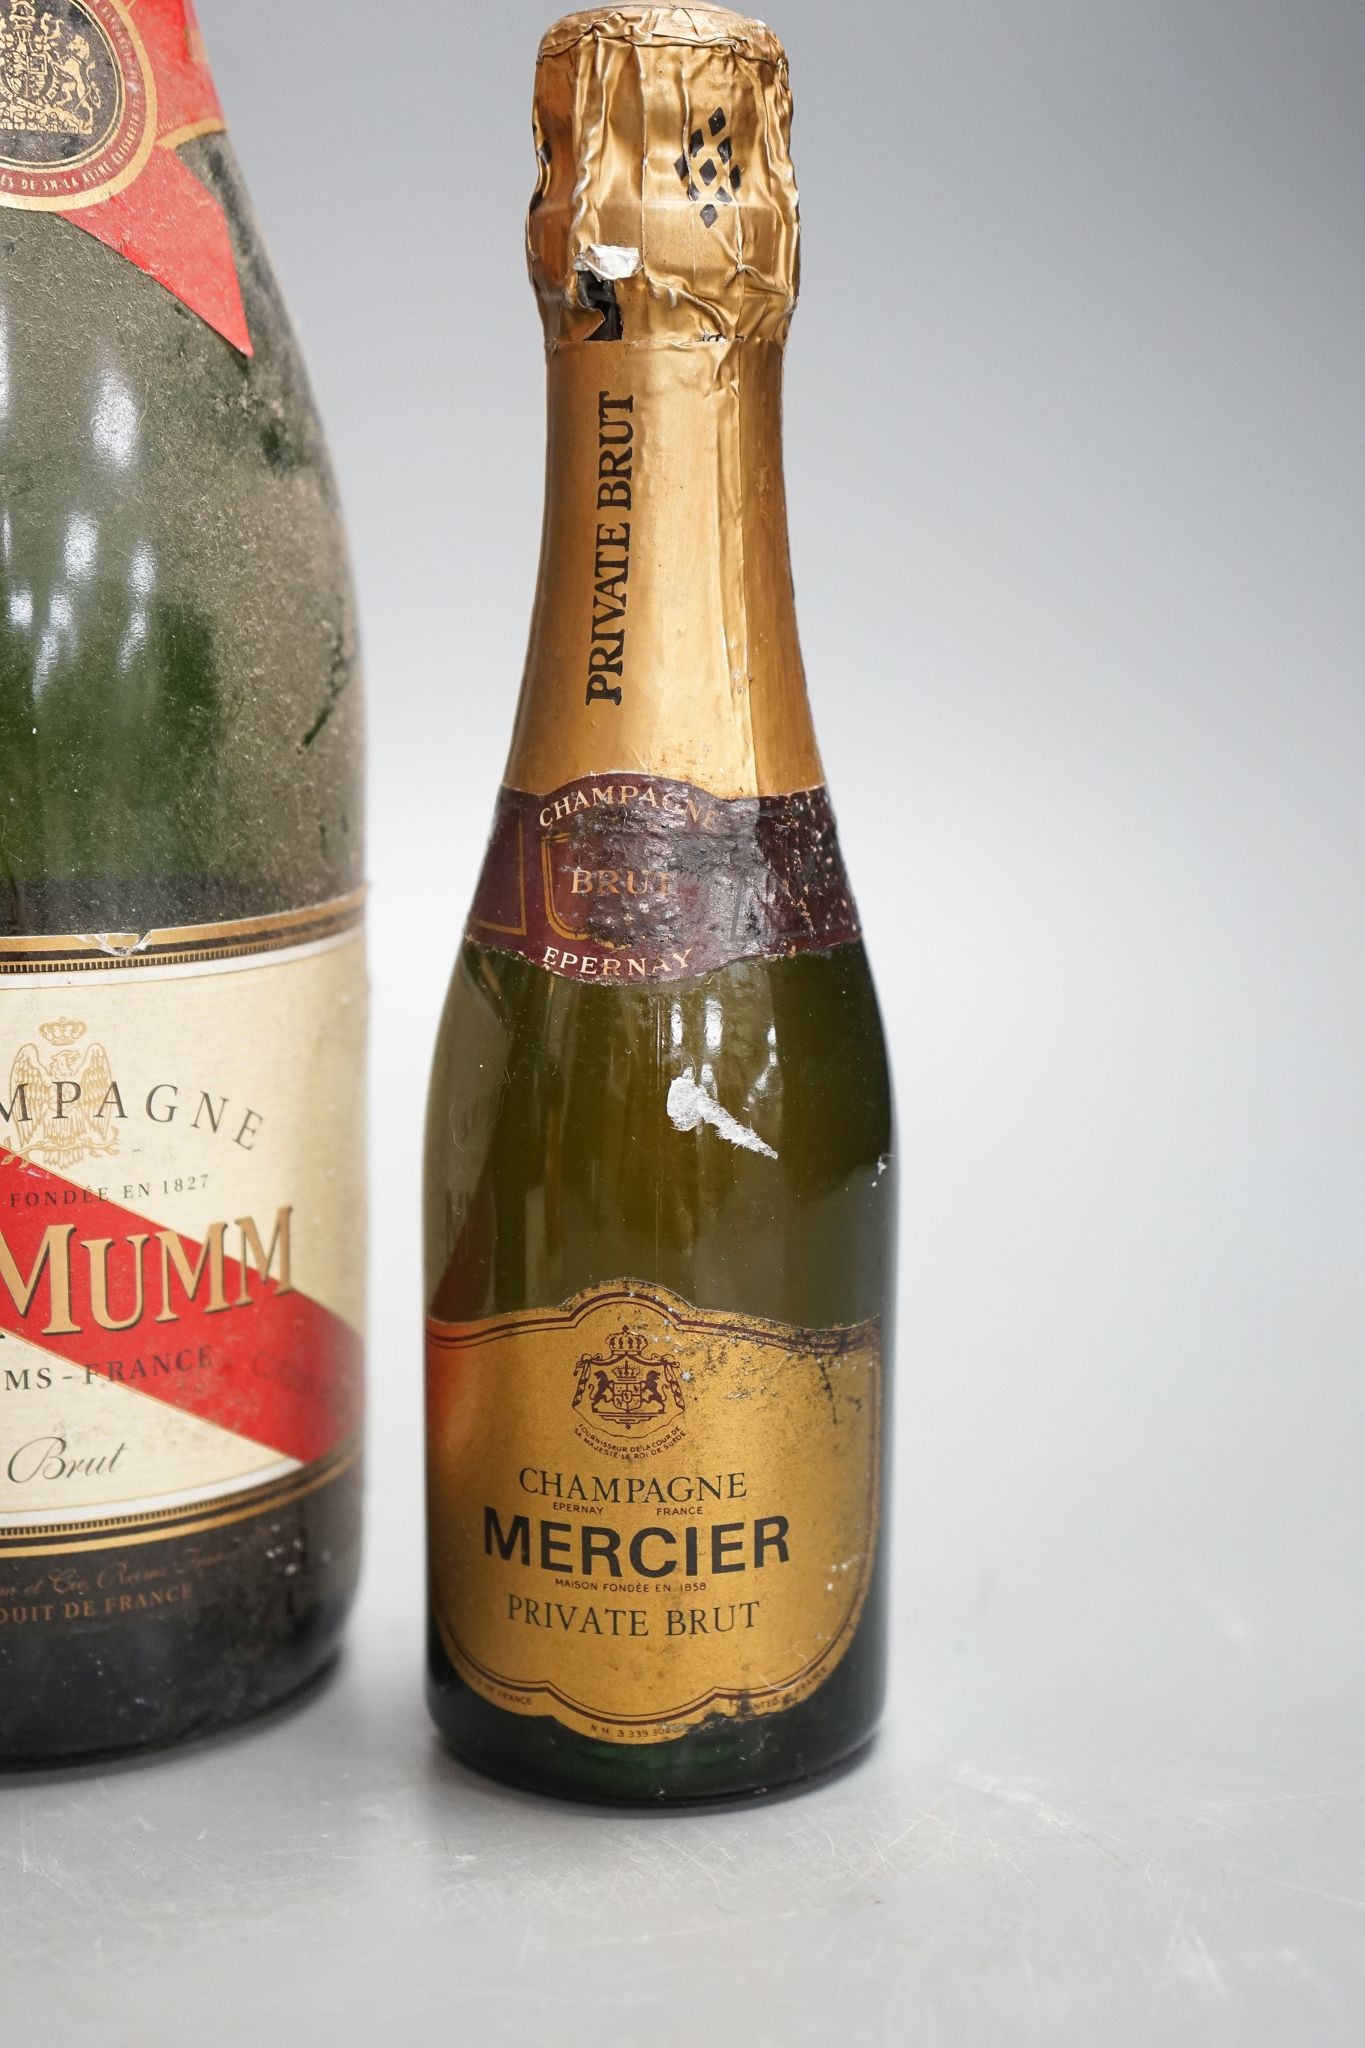 Two bottles of Mumm champagne and two small bottles of champagne